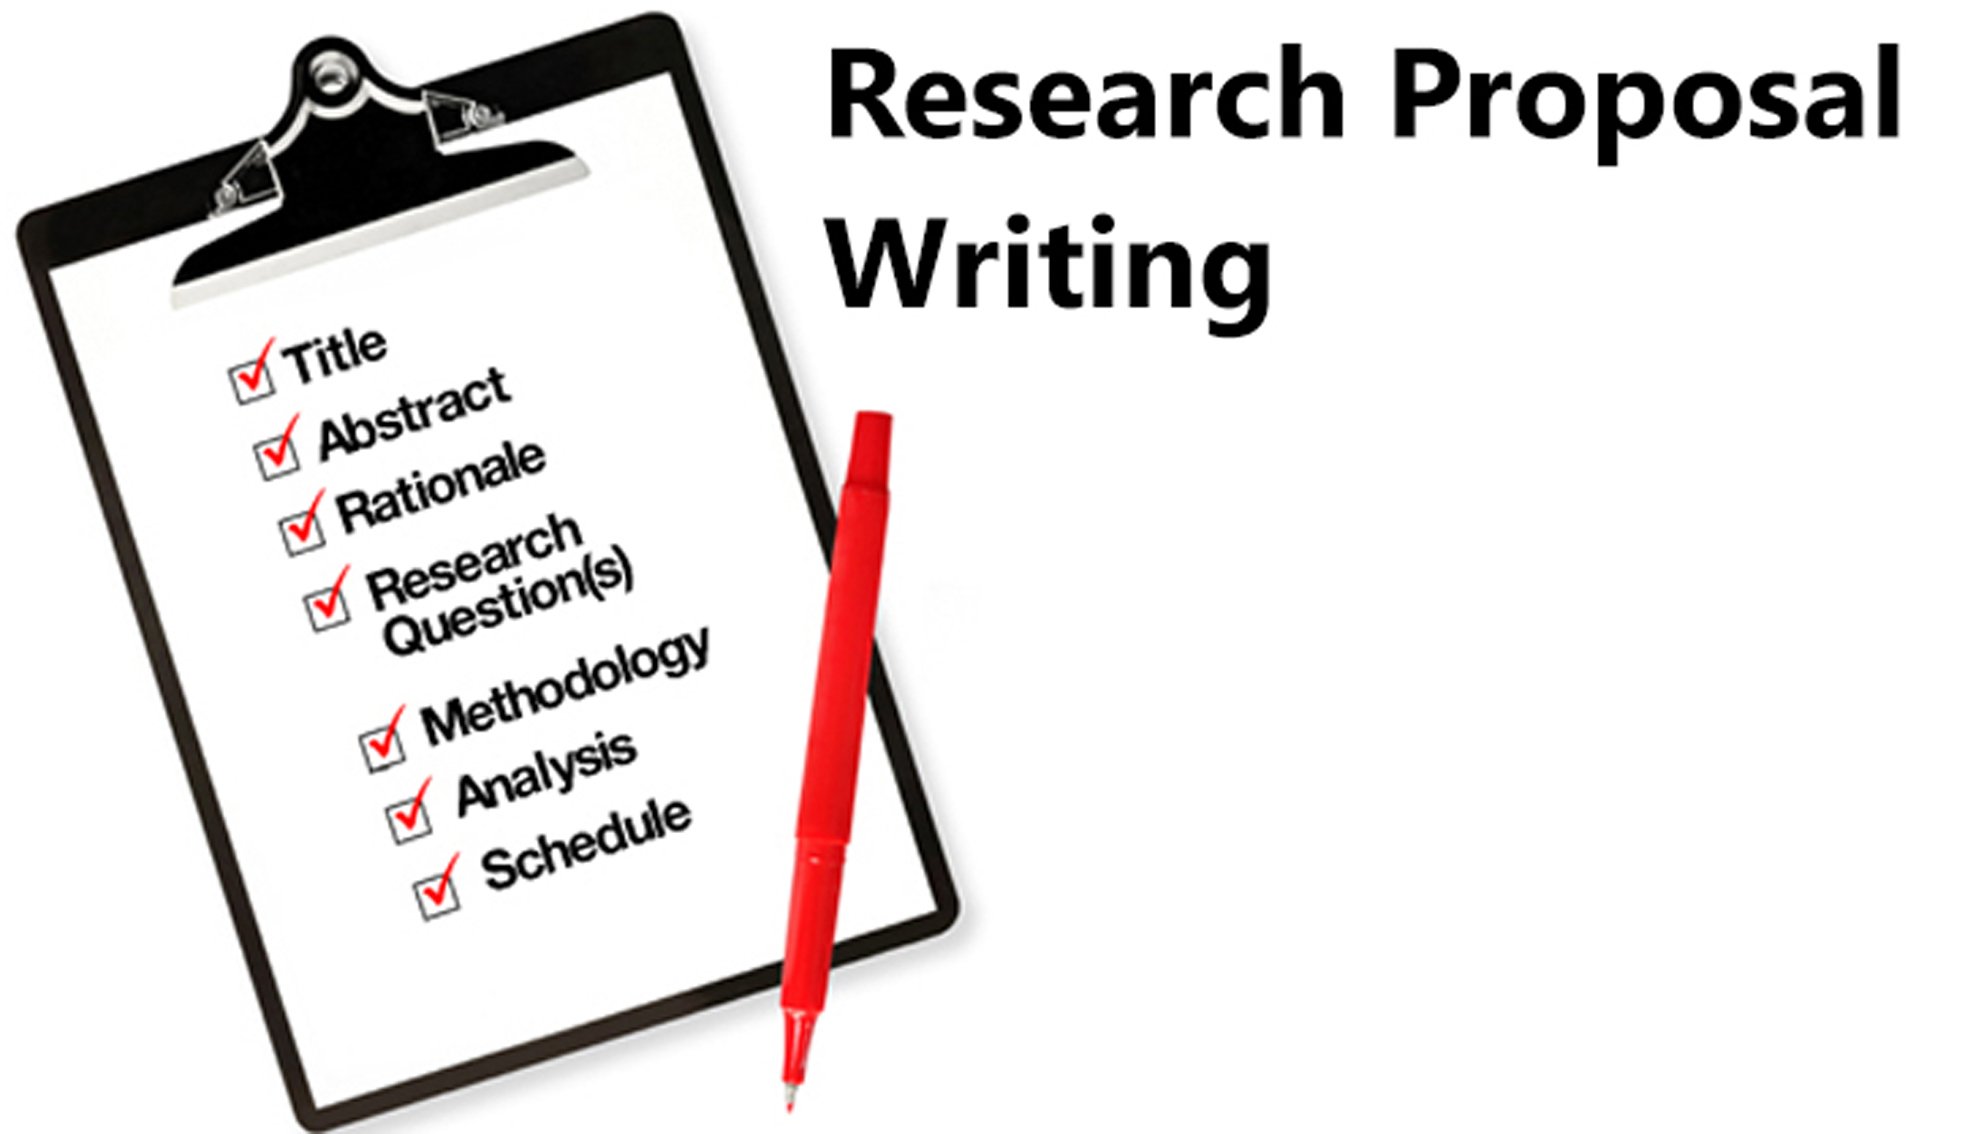 Proquest dissertations and theses advanced search